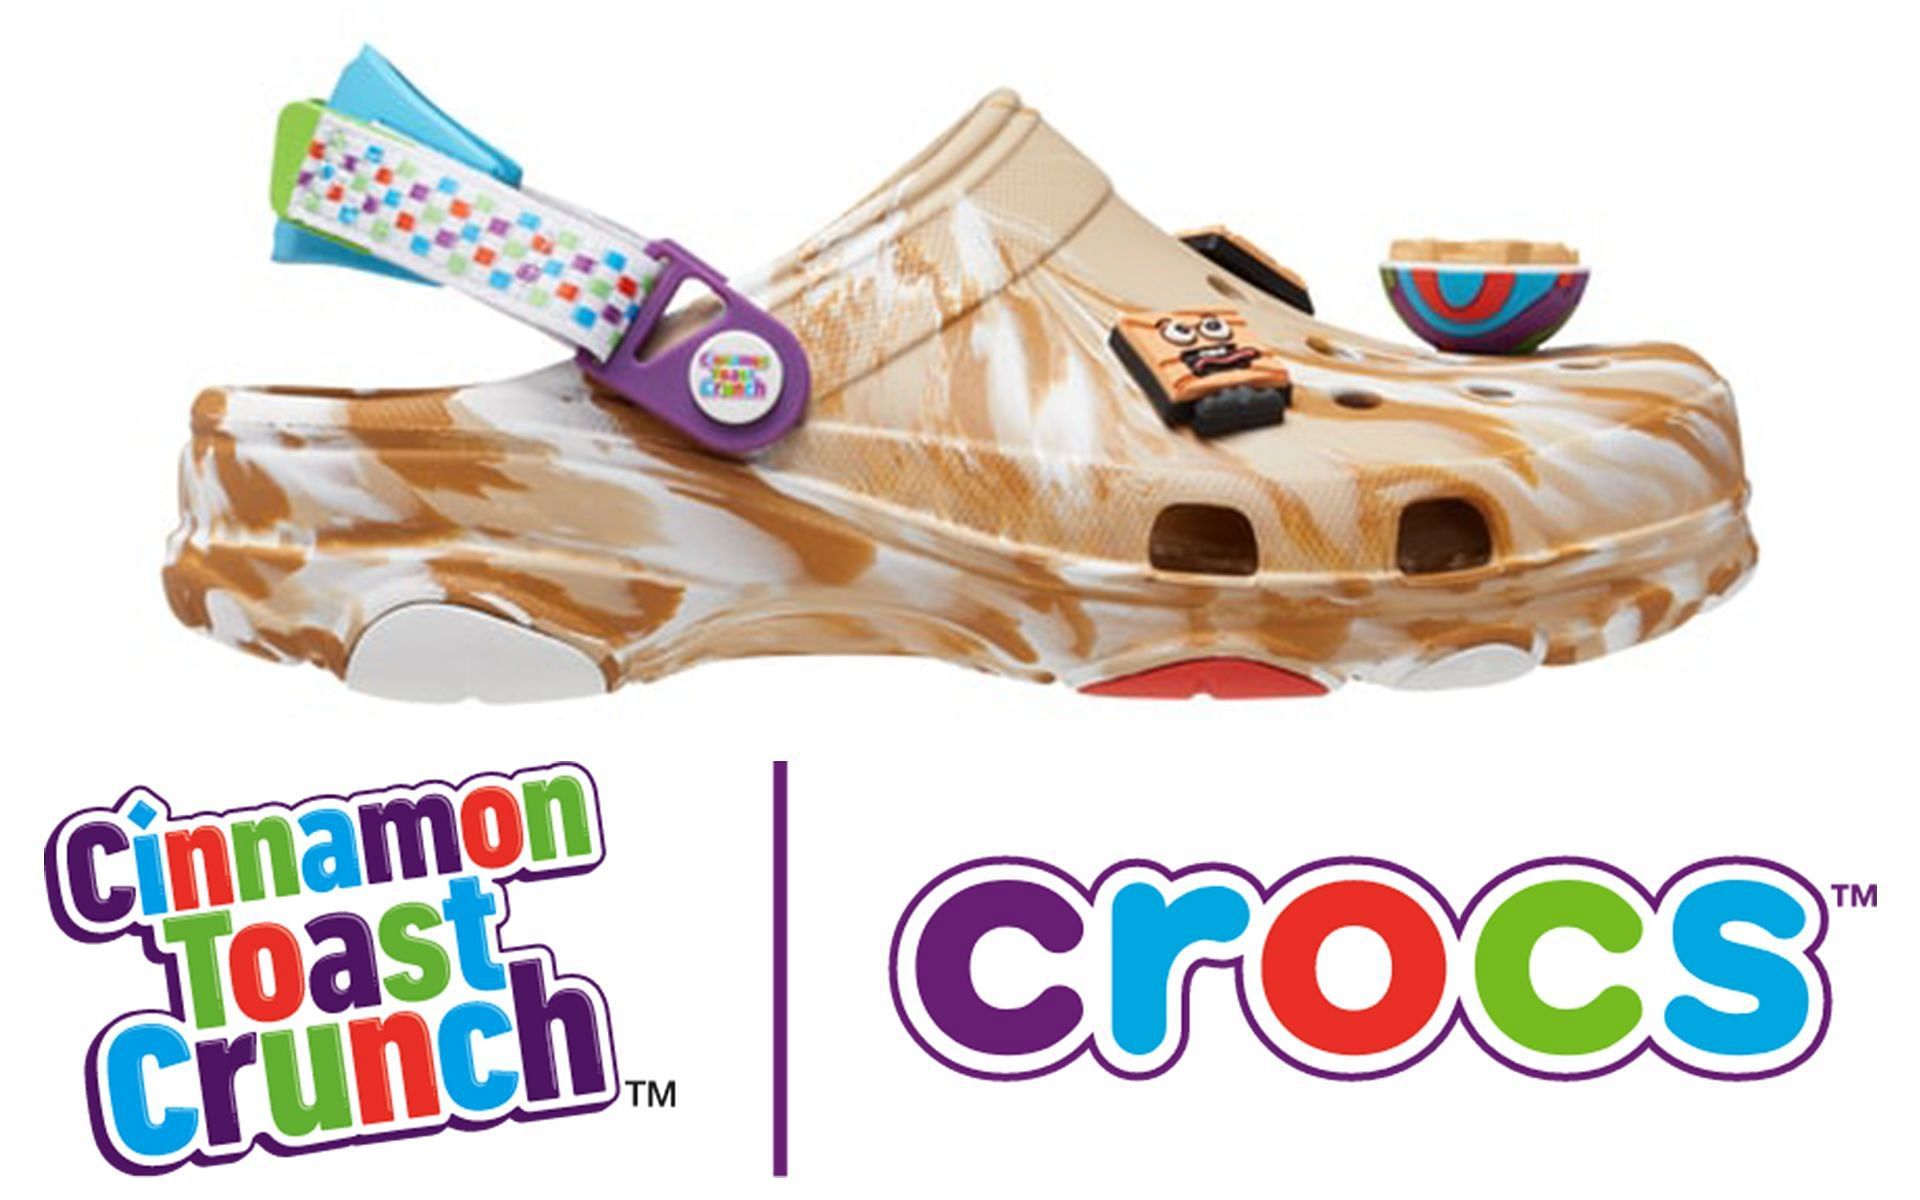 Crocs X General Mills collab Where to buy, release date, price, and